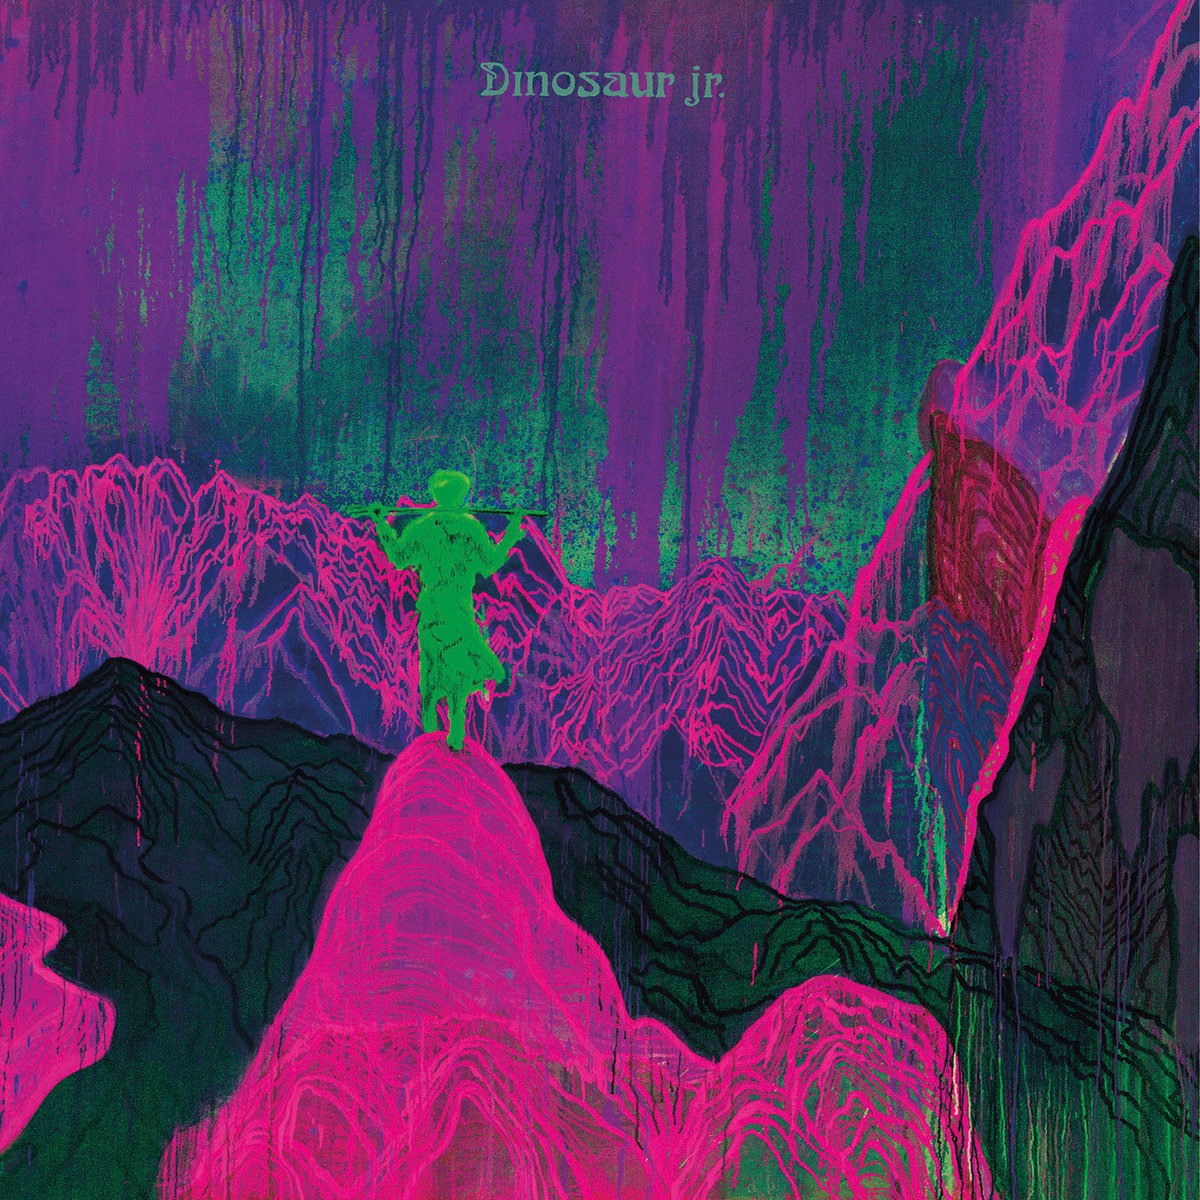 Dinosaur Jr. - Give A Glimpse Of What Yer Not (2016) Album Info